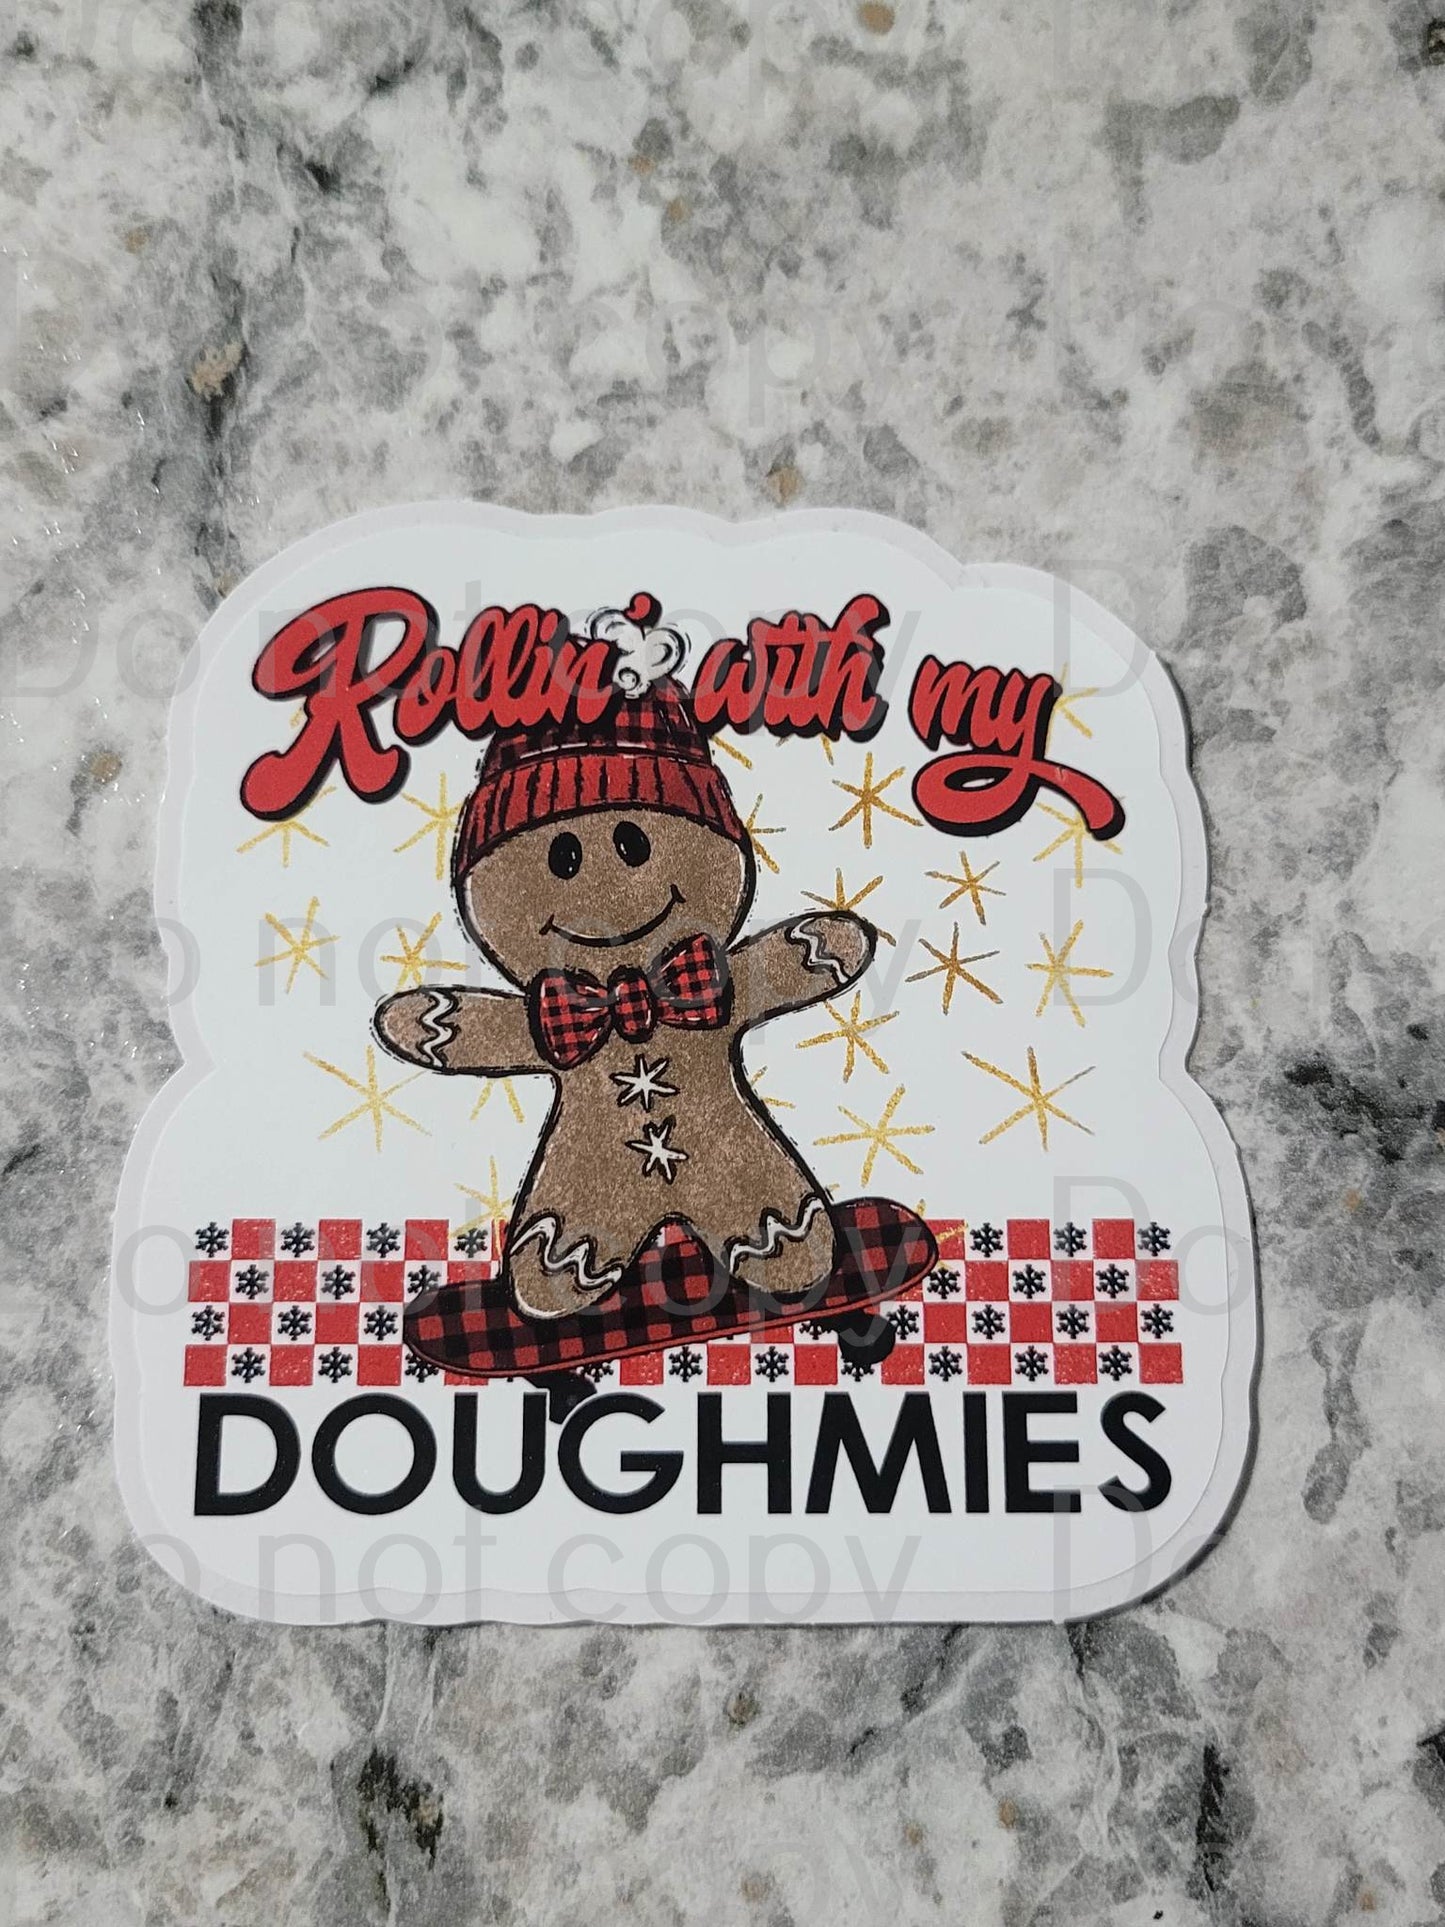 Rollin' with my doughmies Die cut sticker 3-5 Business Day TAT.